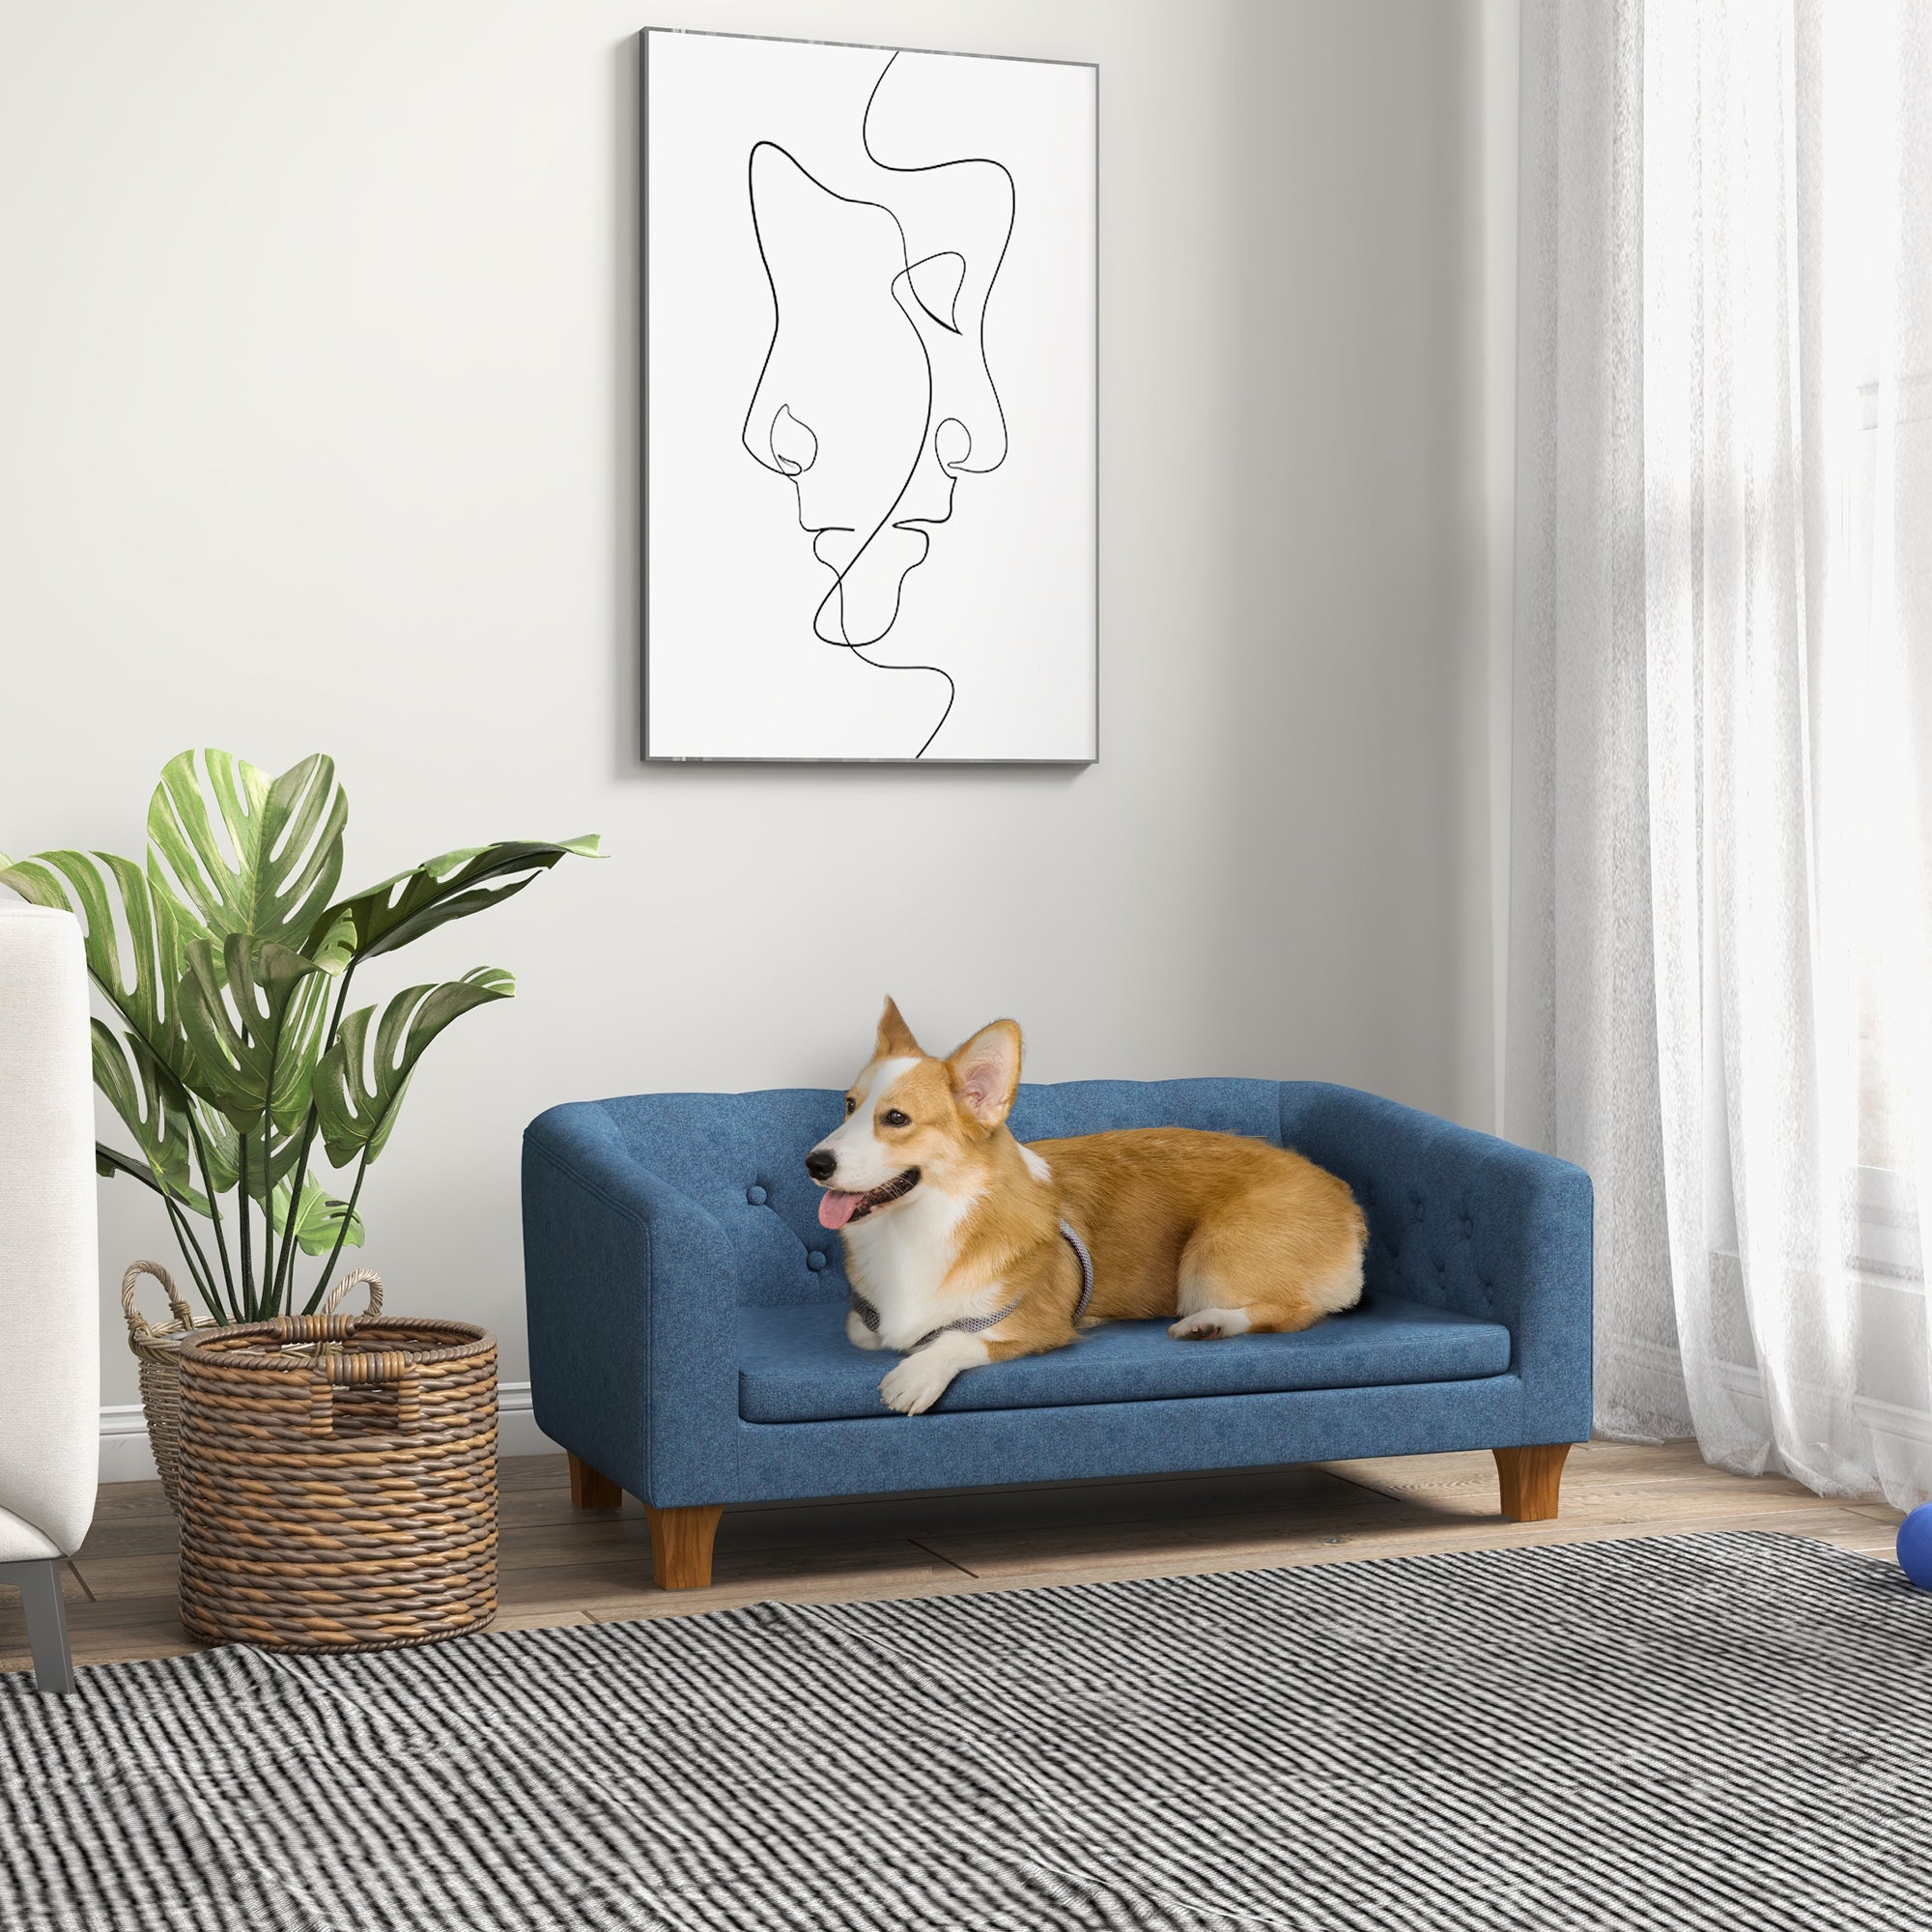 PawHut Raised Dog Sofa, Elevated Pet Couch for Small blue-wood